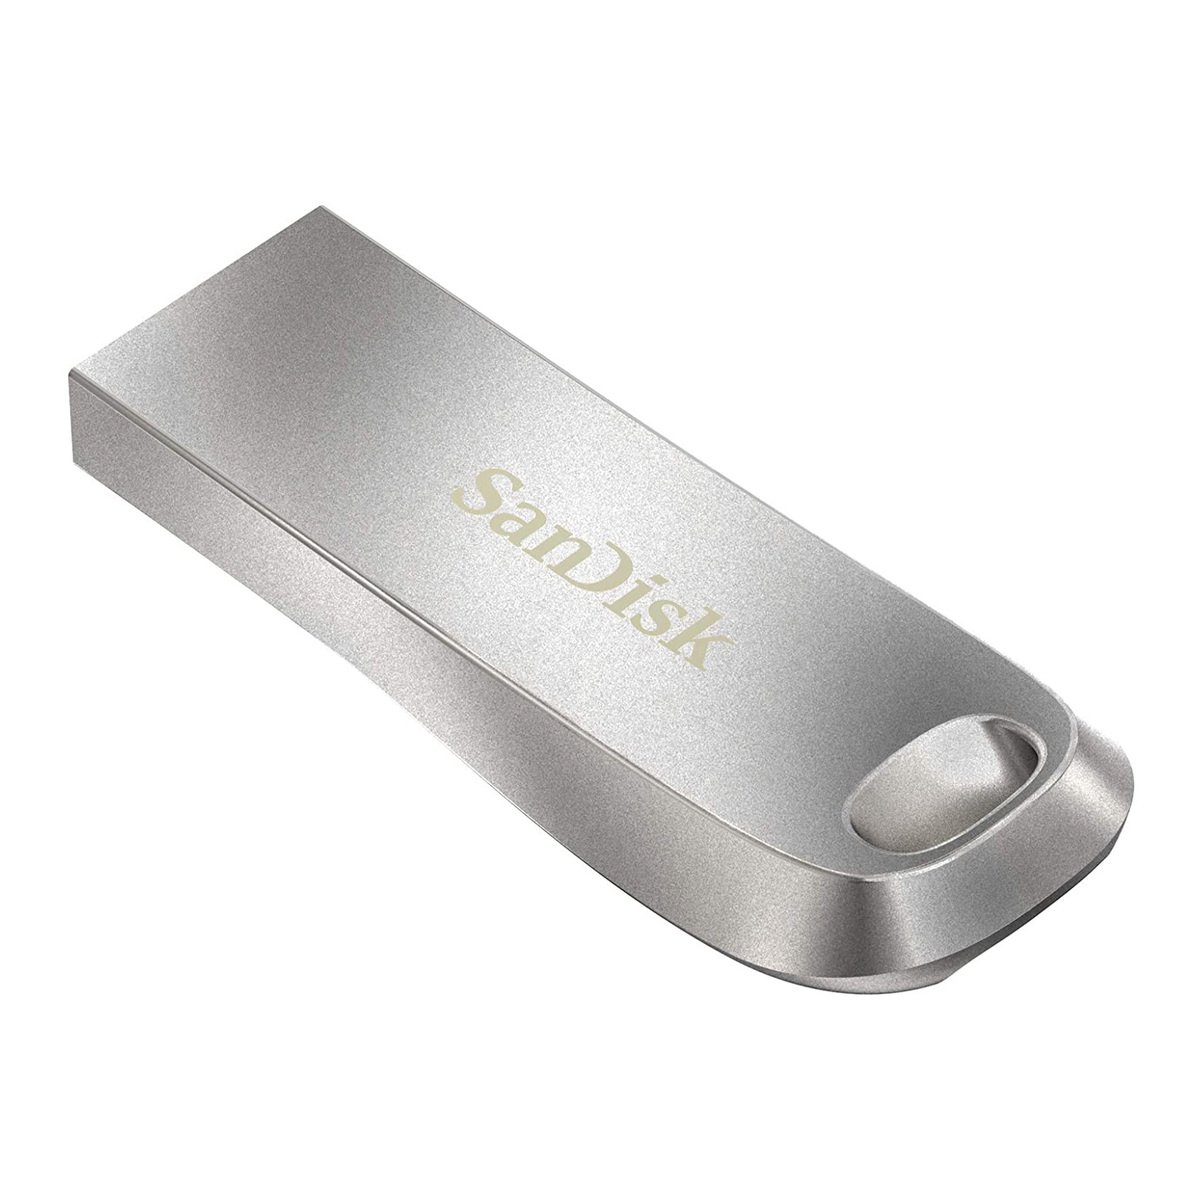 Sandisk USB3.1 Luxe SDCZ74 64GB Flash drive